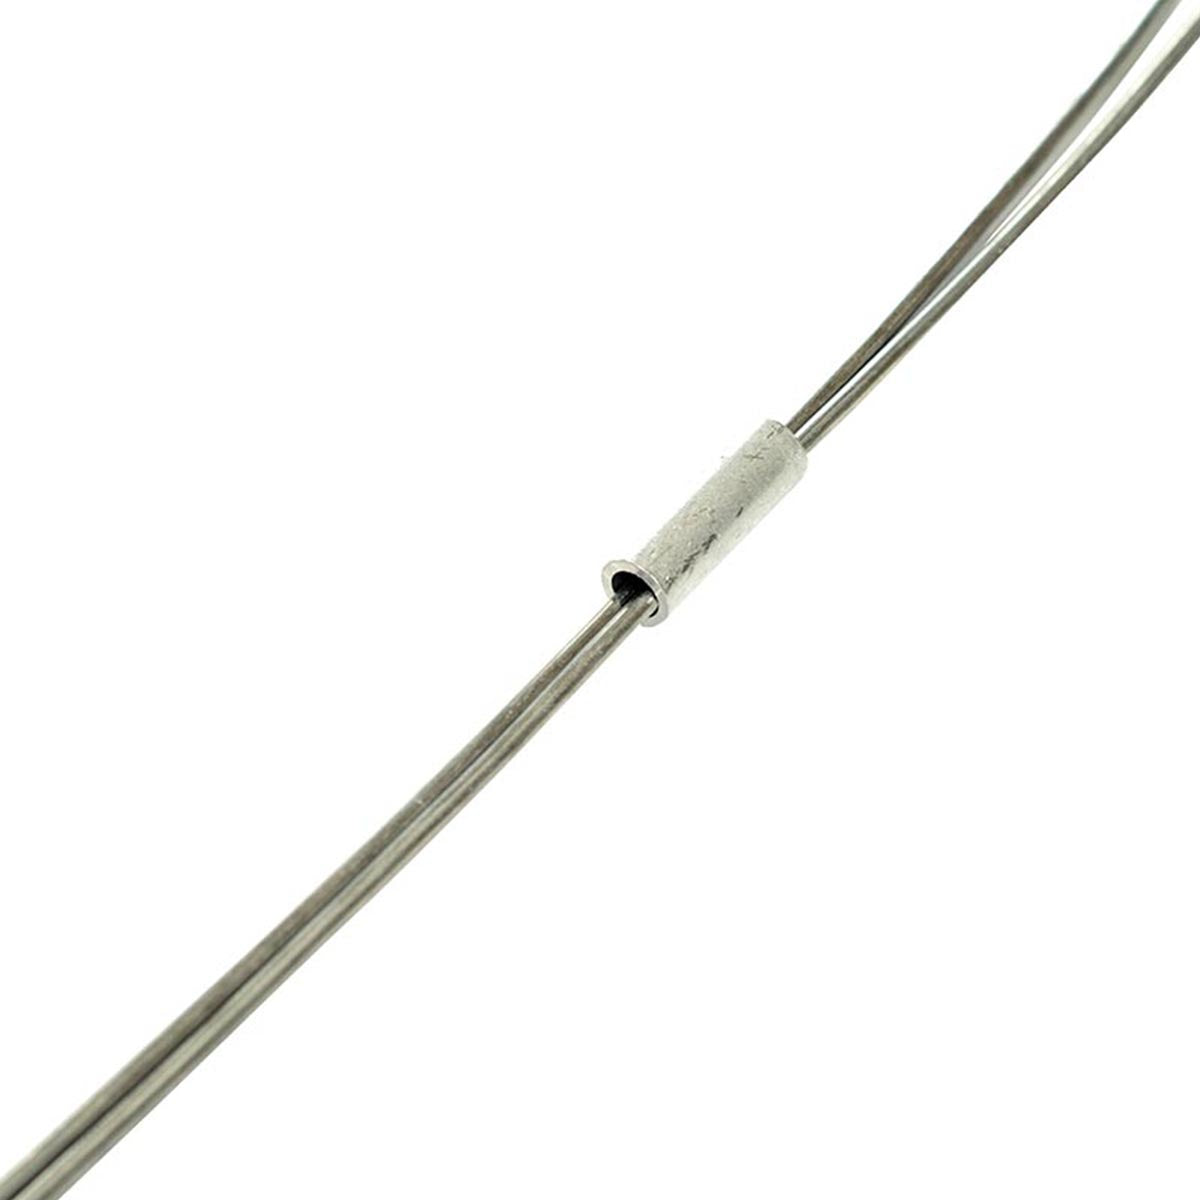 Nemtek Electric Fence Stainless Steel Ferrules - 6mm (50 Pack) Cable Through Ferrule View EF18-1